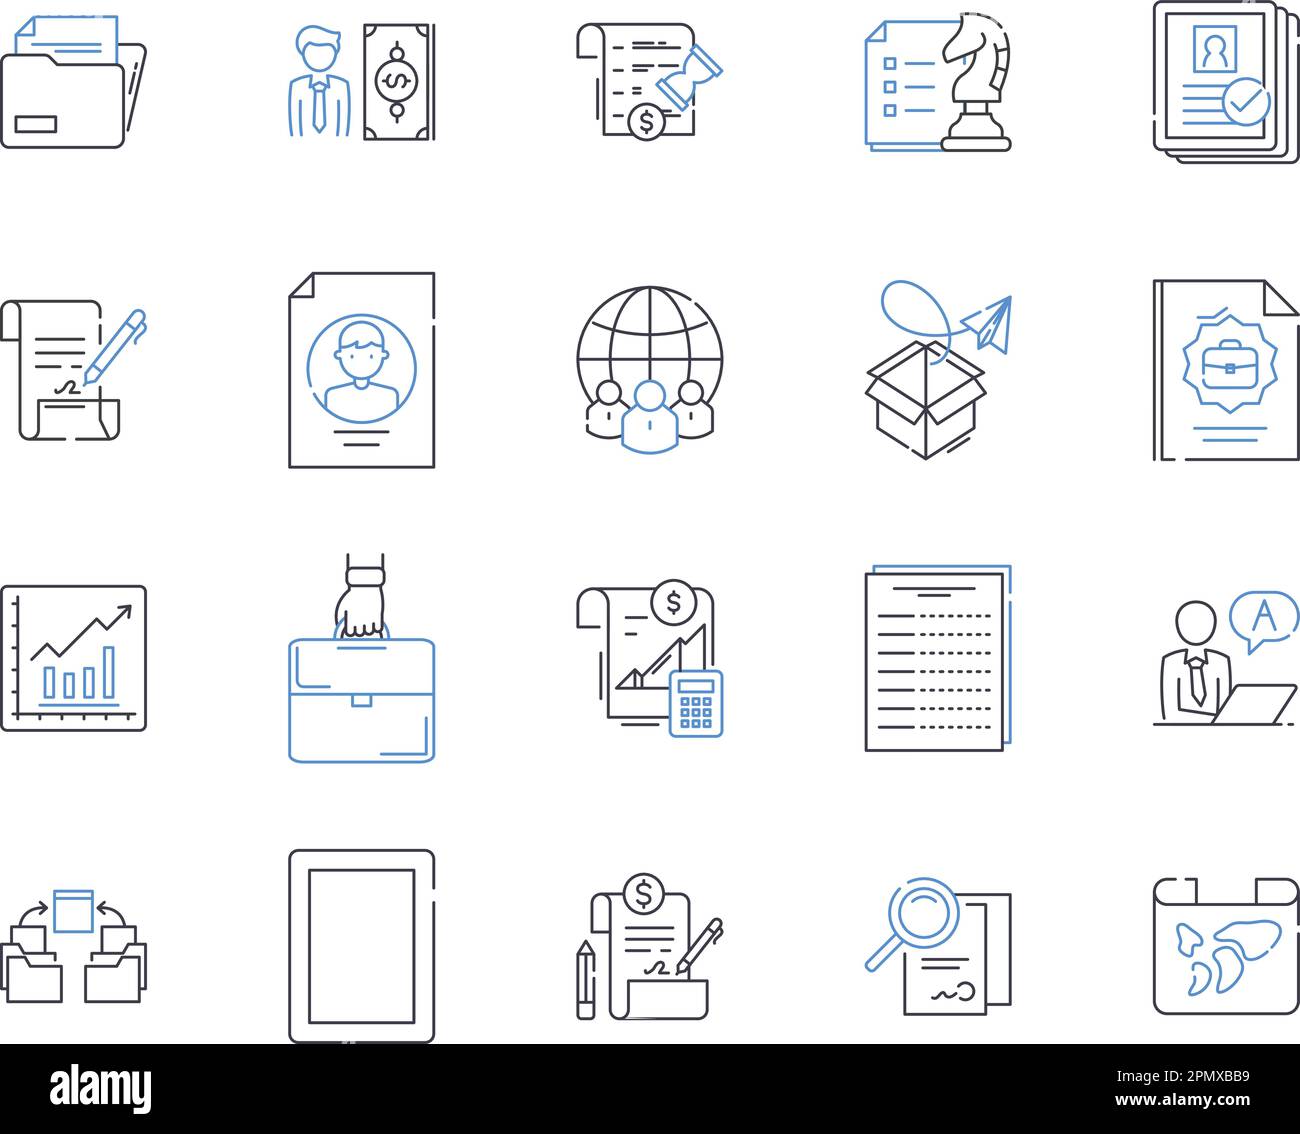 Document processing outline icons collection. Documentation, Processing, Editing, Scanning, Creating, Sharing, Formatting vector and illustration Stock Vector